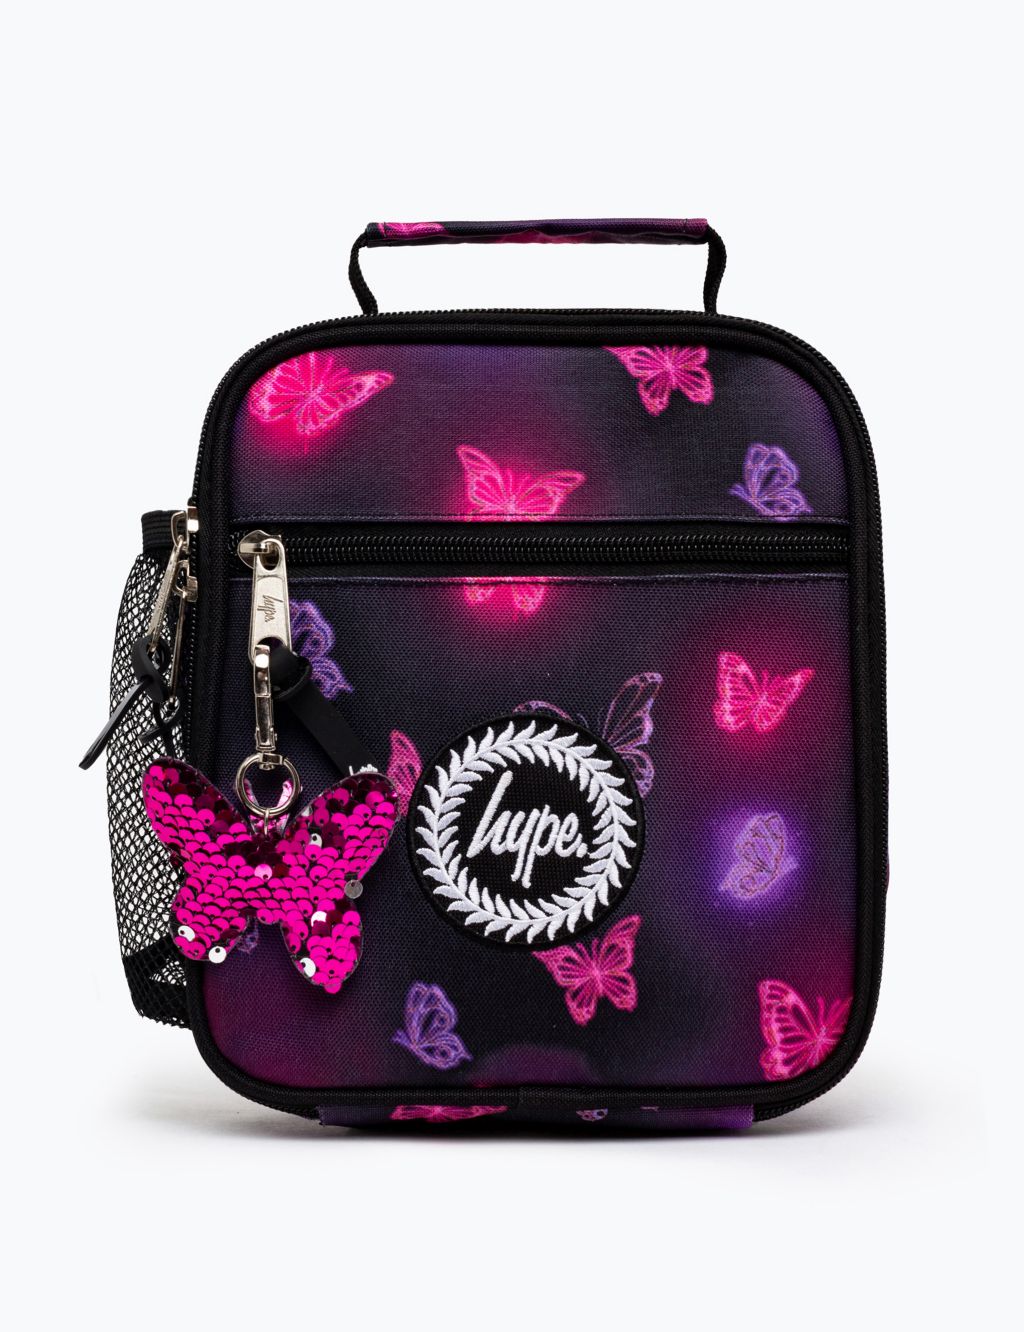 Kids' Butterfly Print Lunch Box image 1